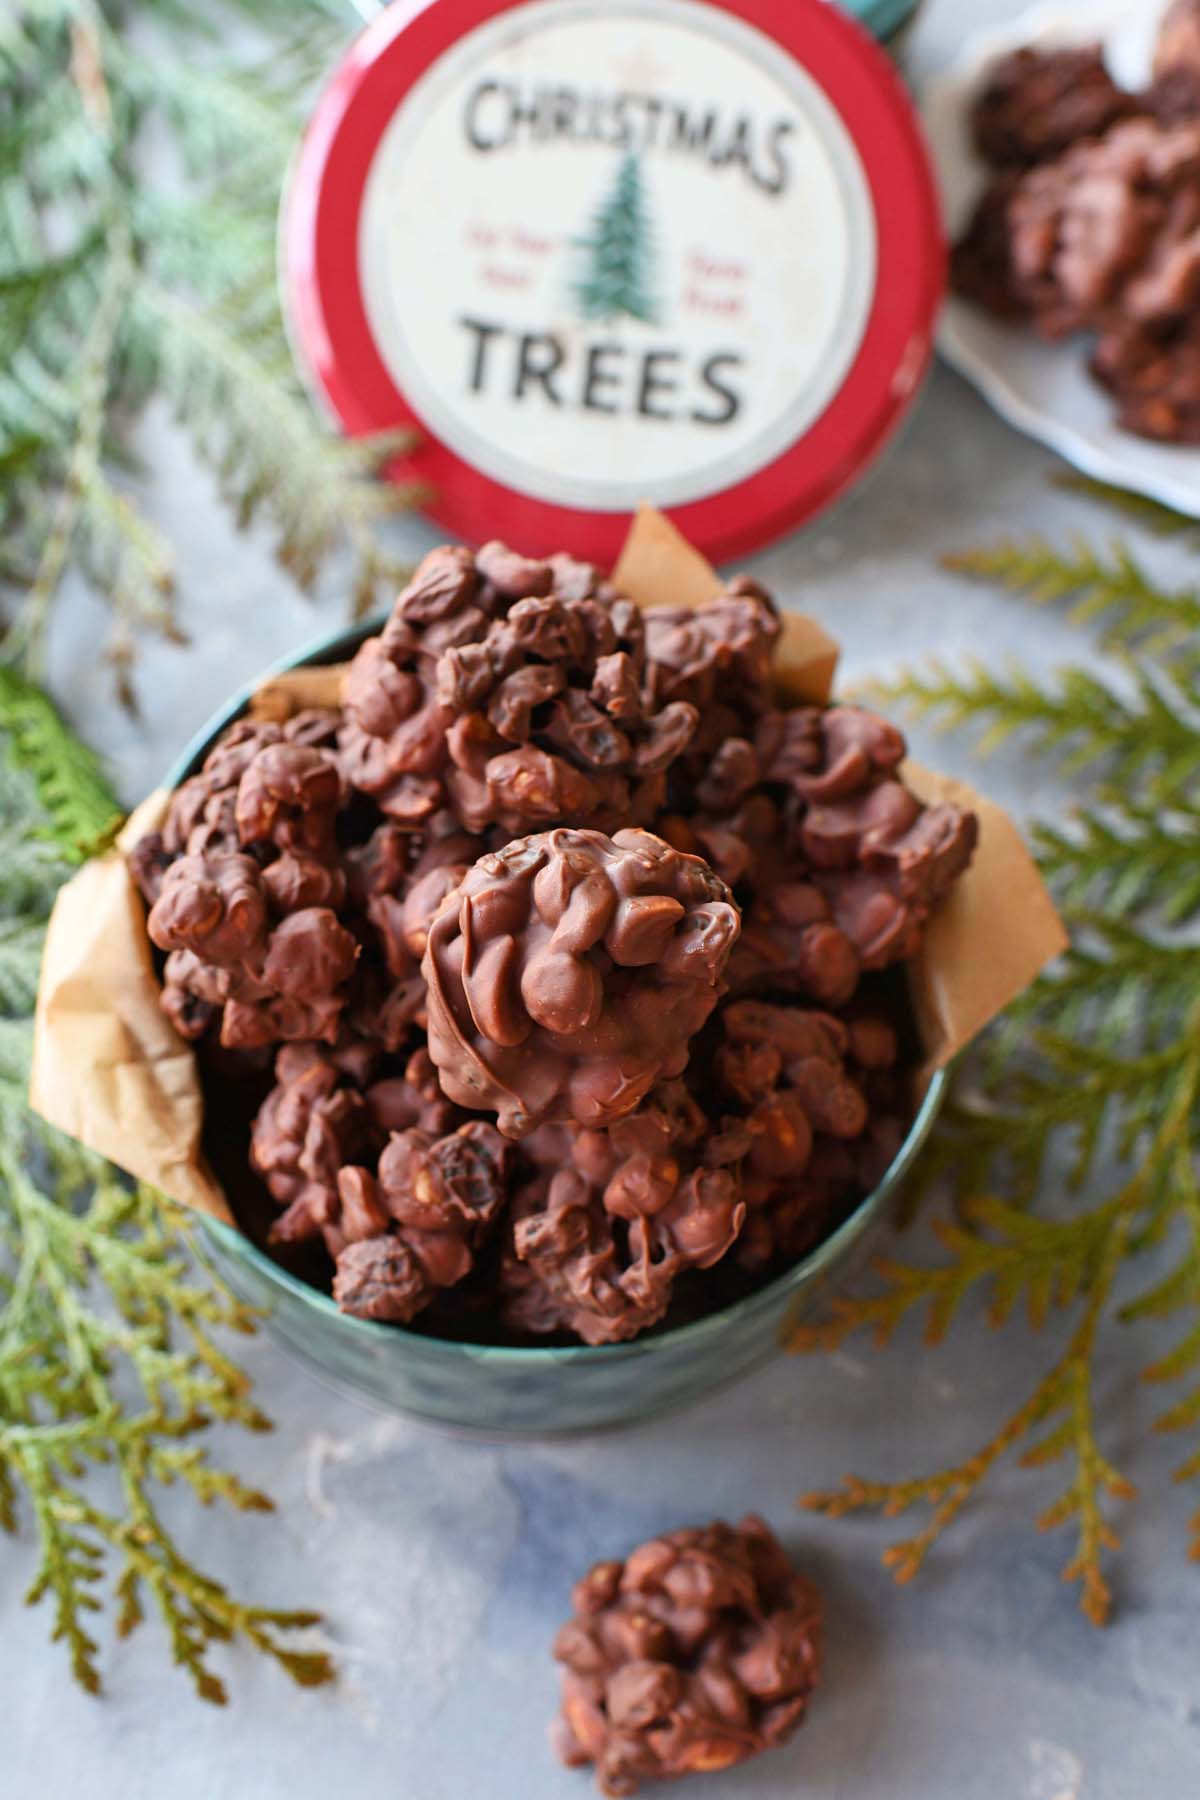 Raisin and Milk chocolate clusters in a small holiday gifting tin.